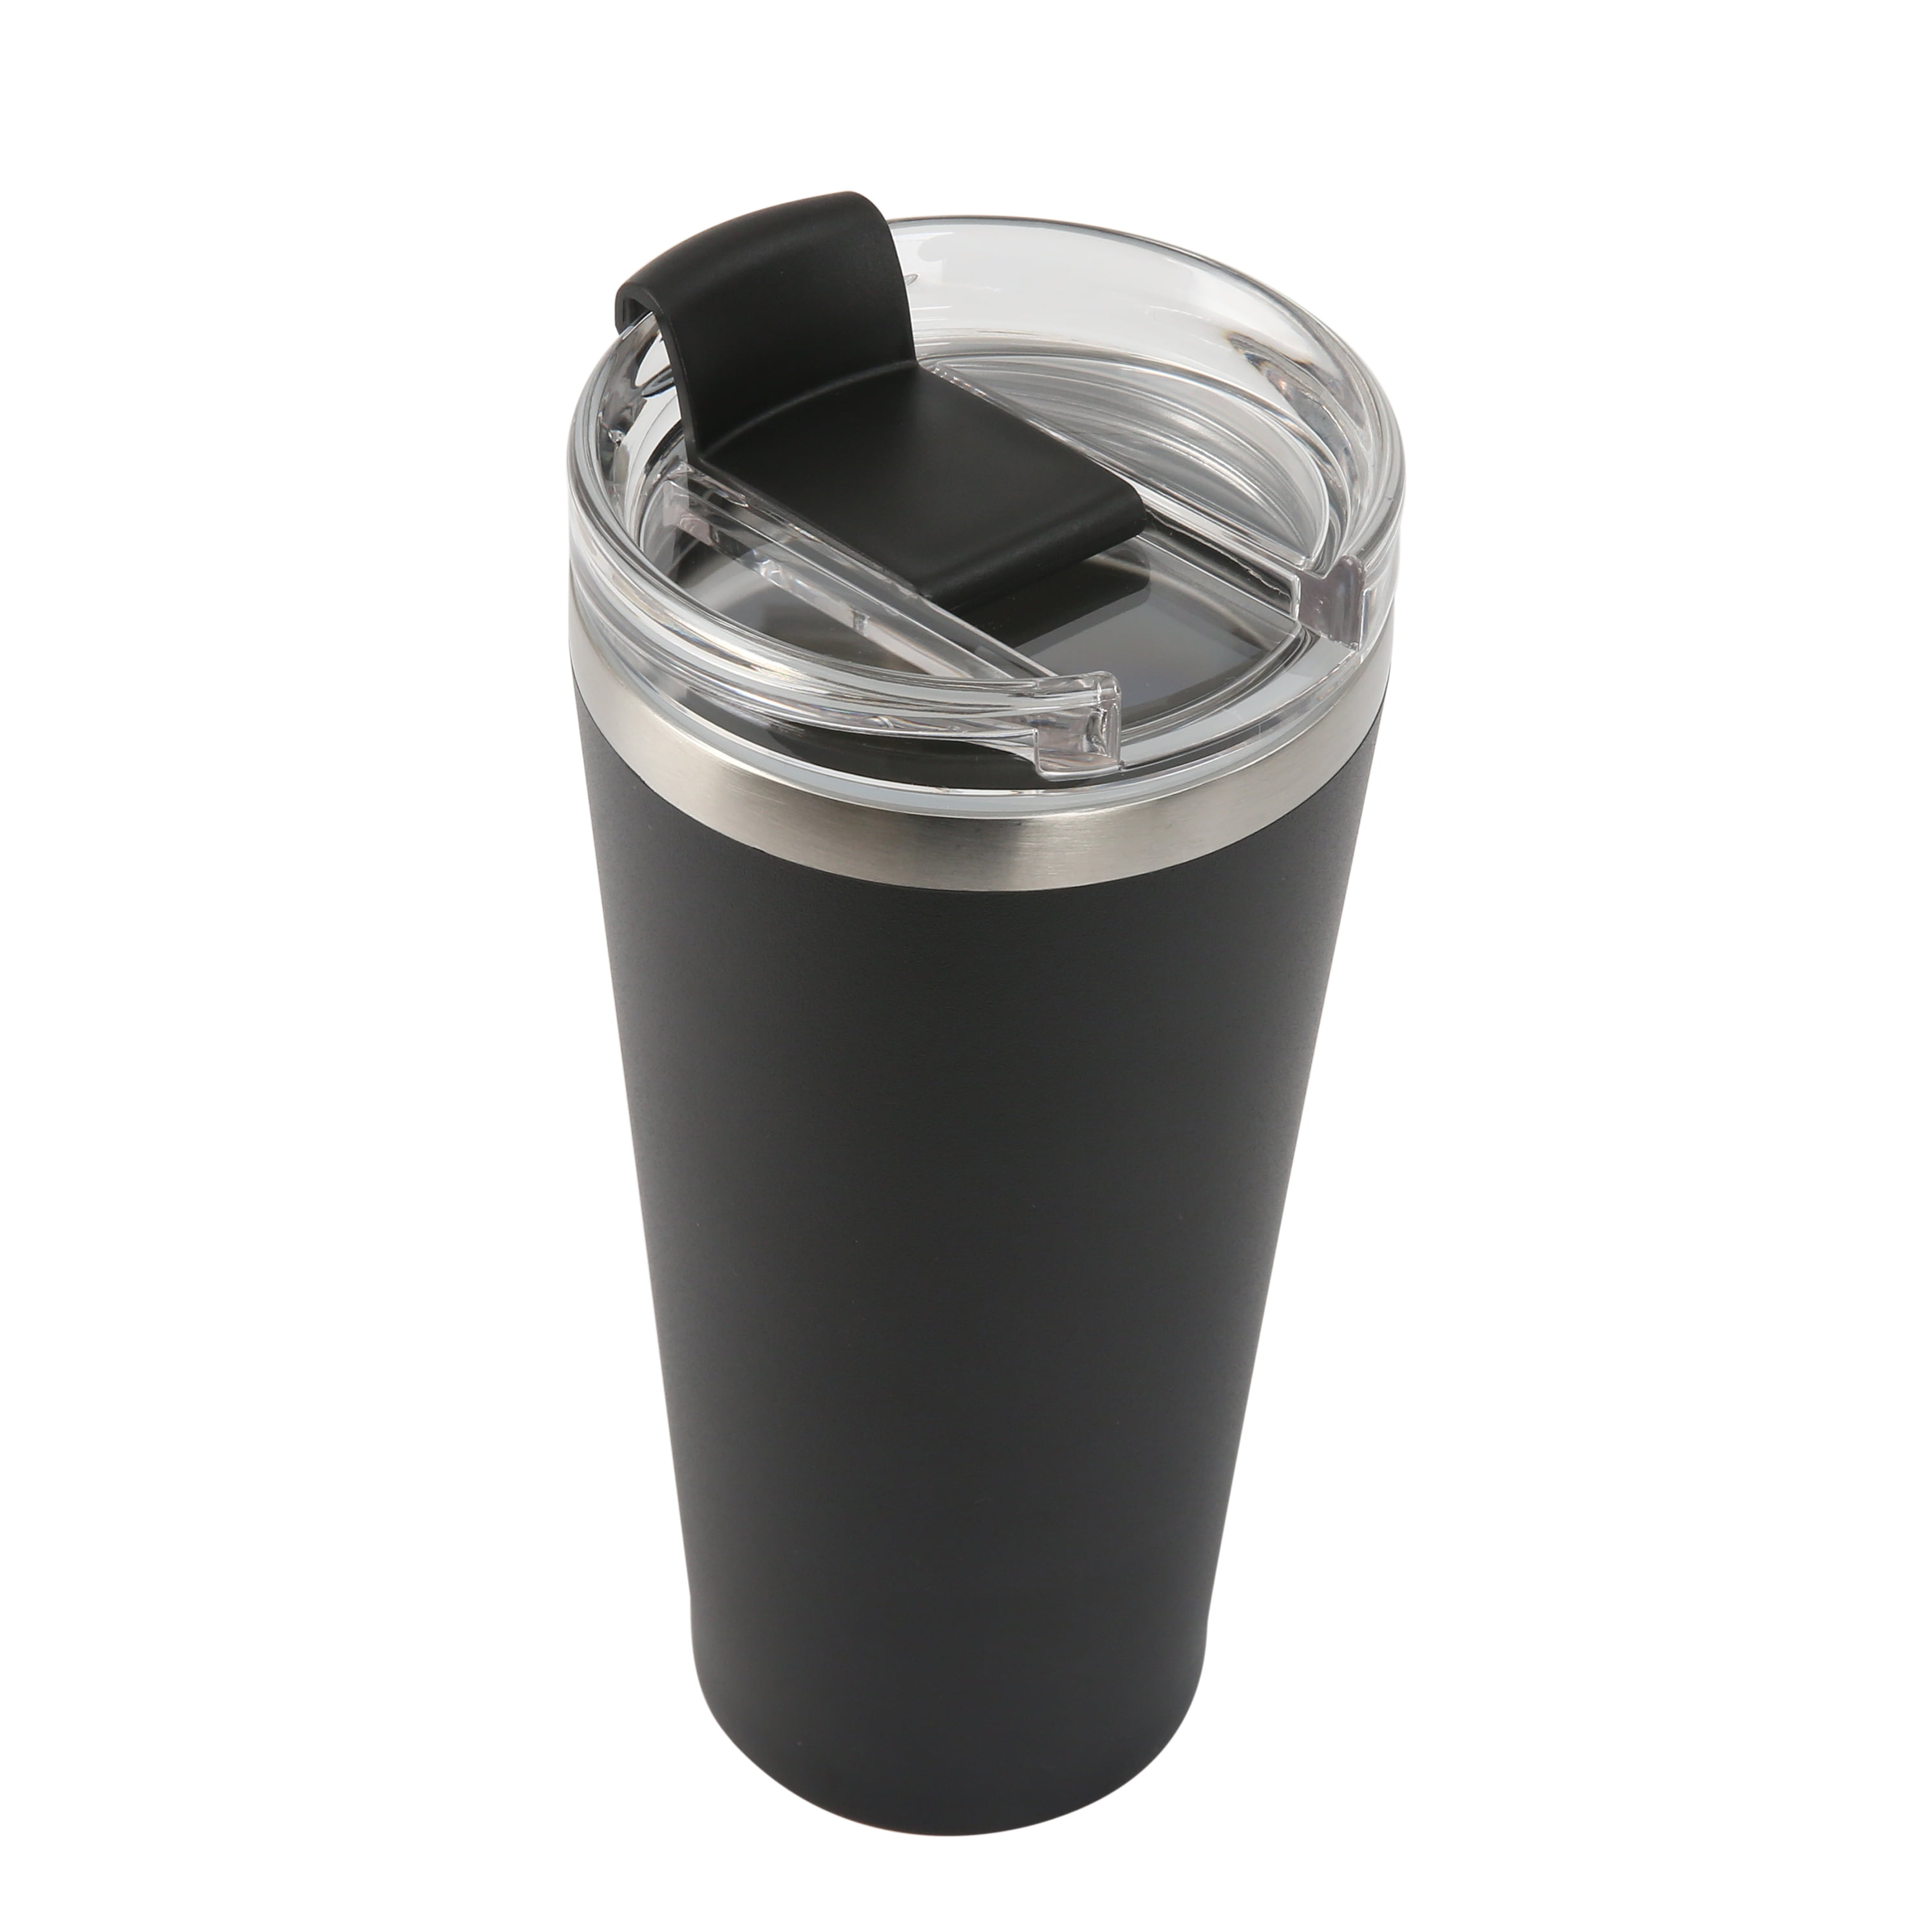 Wellness 20-oz. Double-Wall Stainless Steel Tumbler with Straw - Black